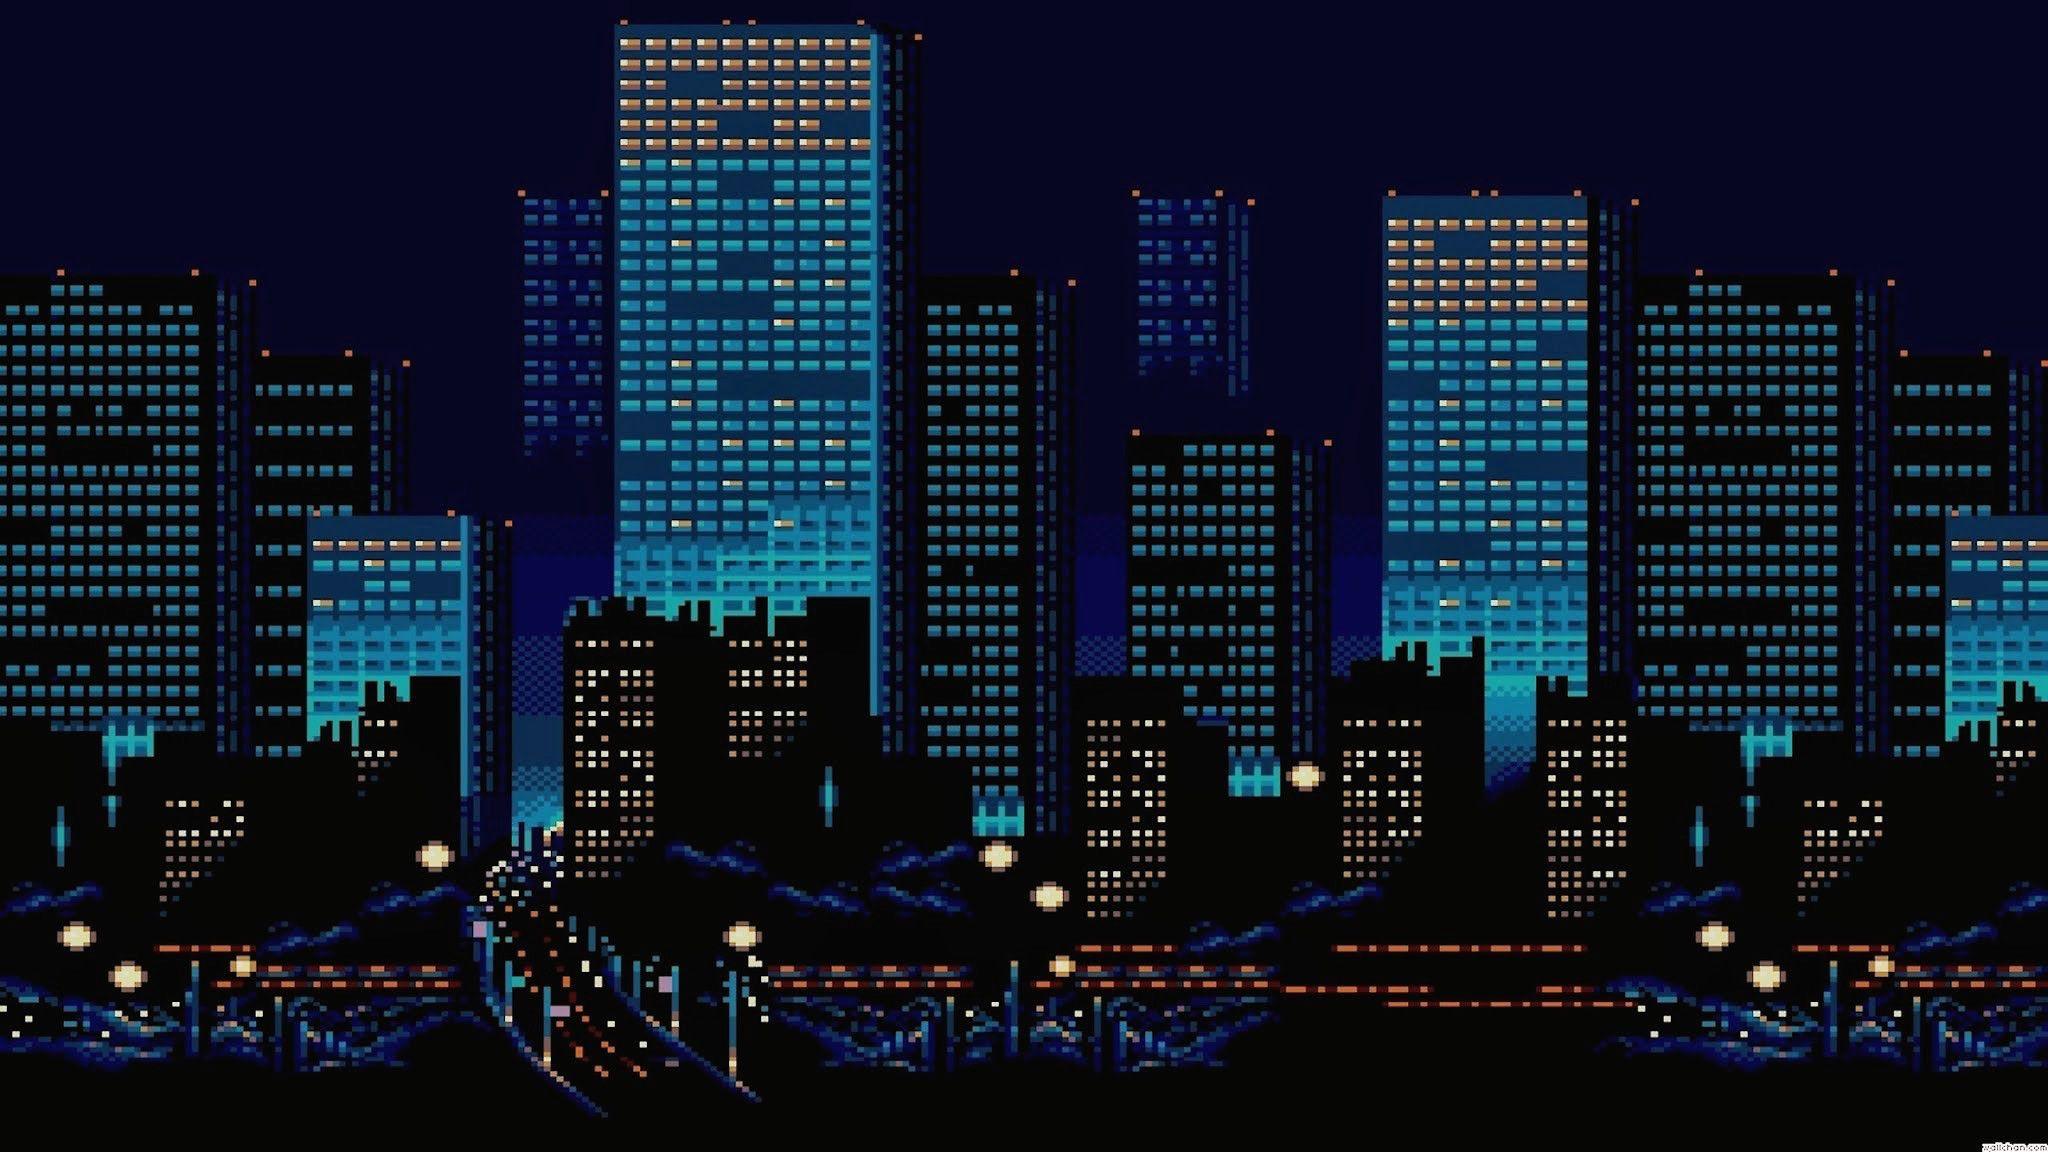 City Pop aesthetic  outpainted and upscaled 4032x2304  rStableDiffusion